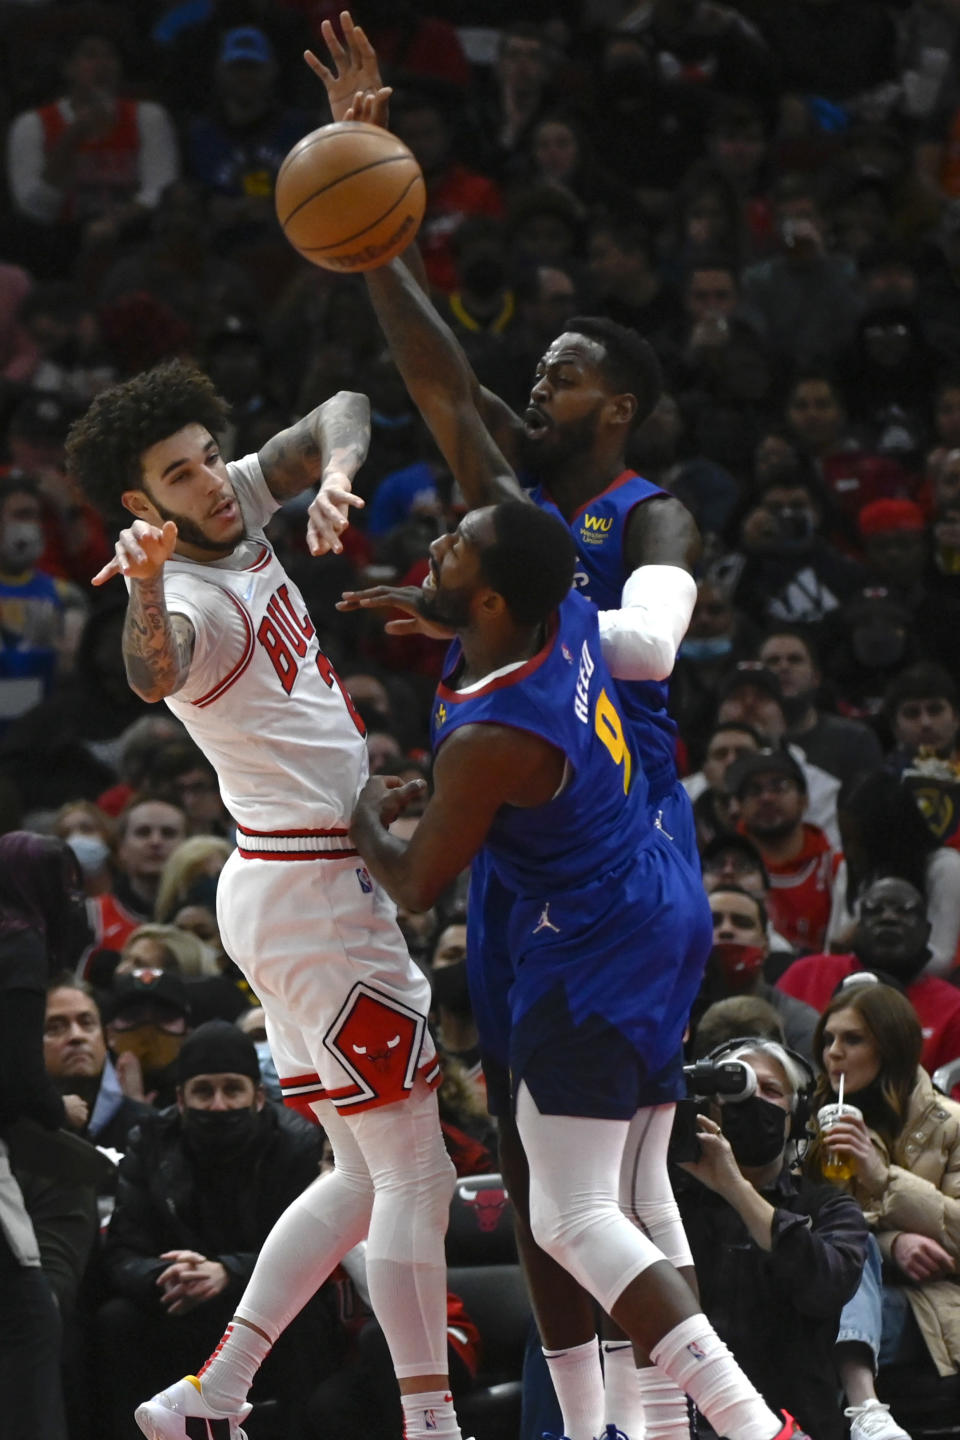 Chicago Bulls guard Lonzo Ball, left, passes the ball away from Denver Nuggets forward JaMychal Green, back, and guard Davon Reed (9) during the first half of an NBA basketball game, Monday, Dec. 6, 2021, in Chicago. (AP Photo/Matt Marton)